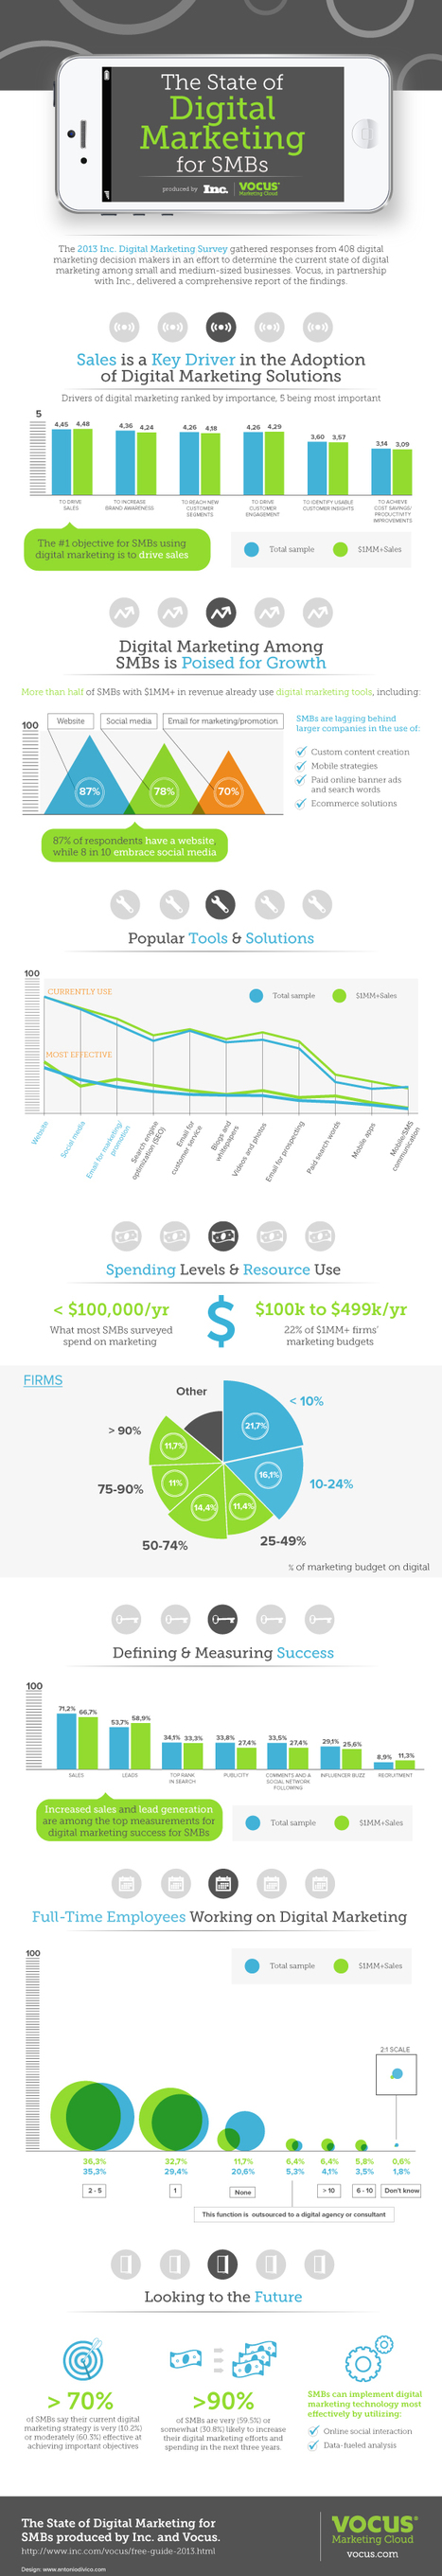 [INFOGRAPHIC] The State of Digital Marketing for SMBs | Vocus | The MarTech Digest | Scoop.it